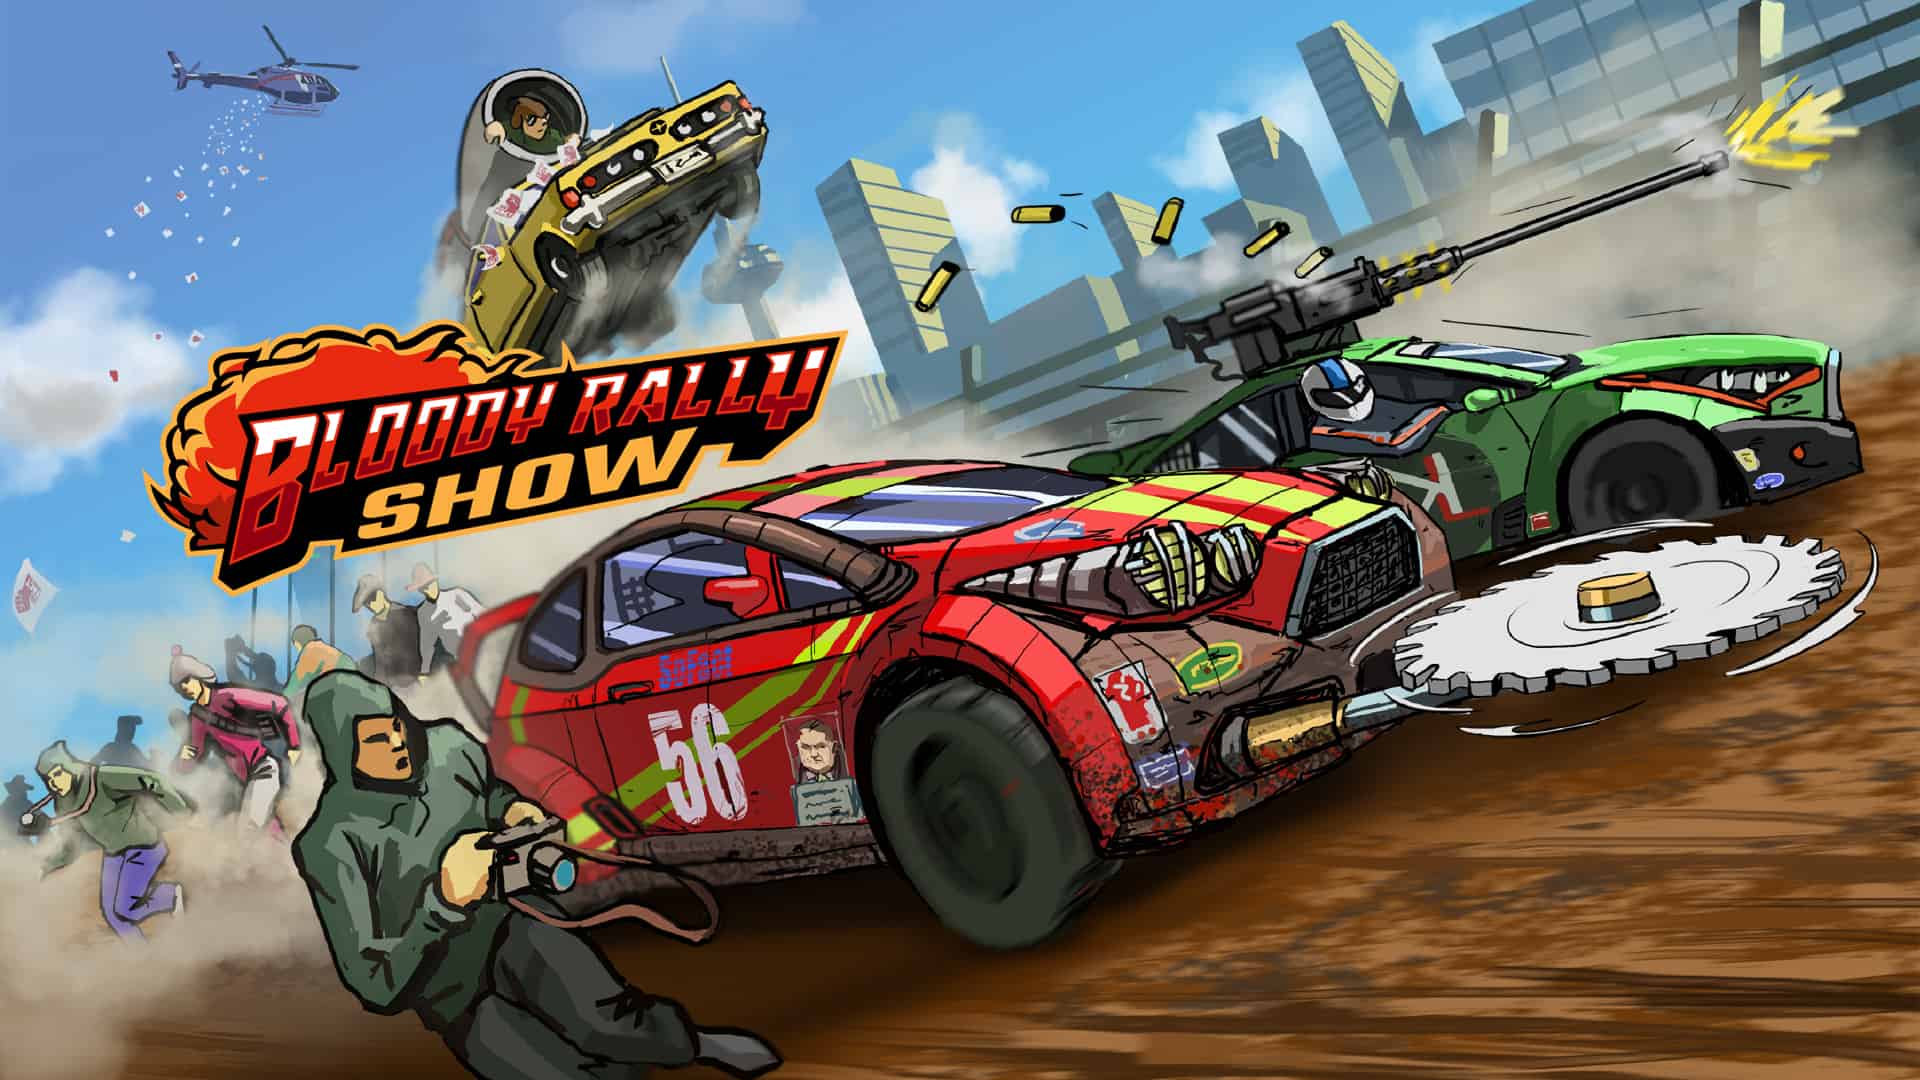 Bloody Rally Show coming to consoles in early November